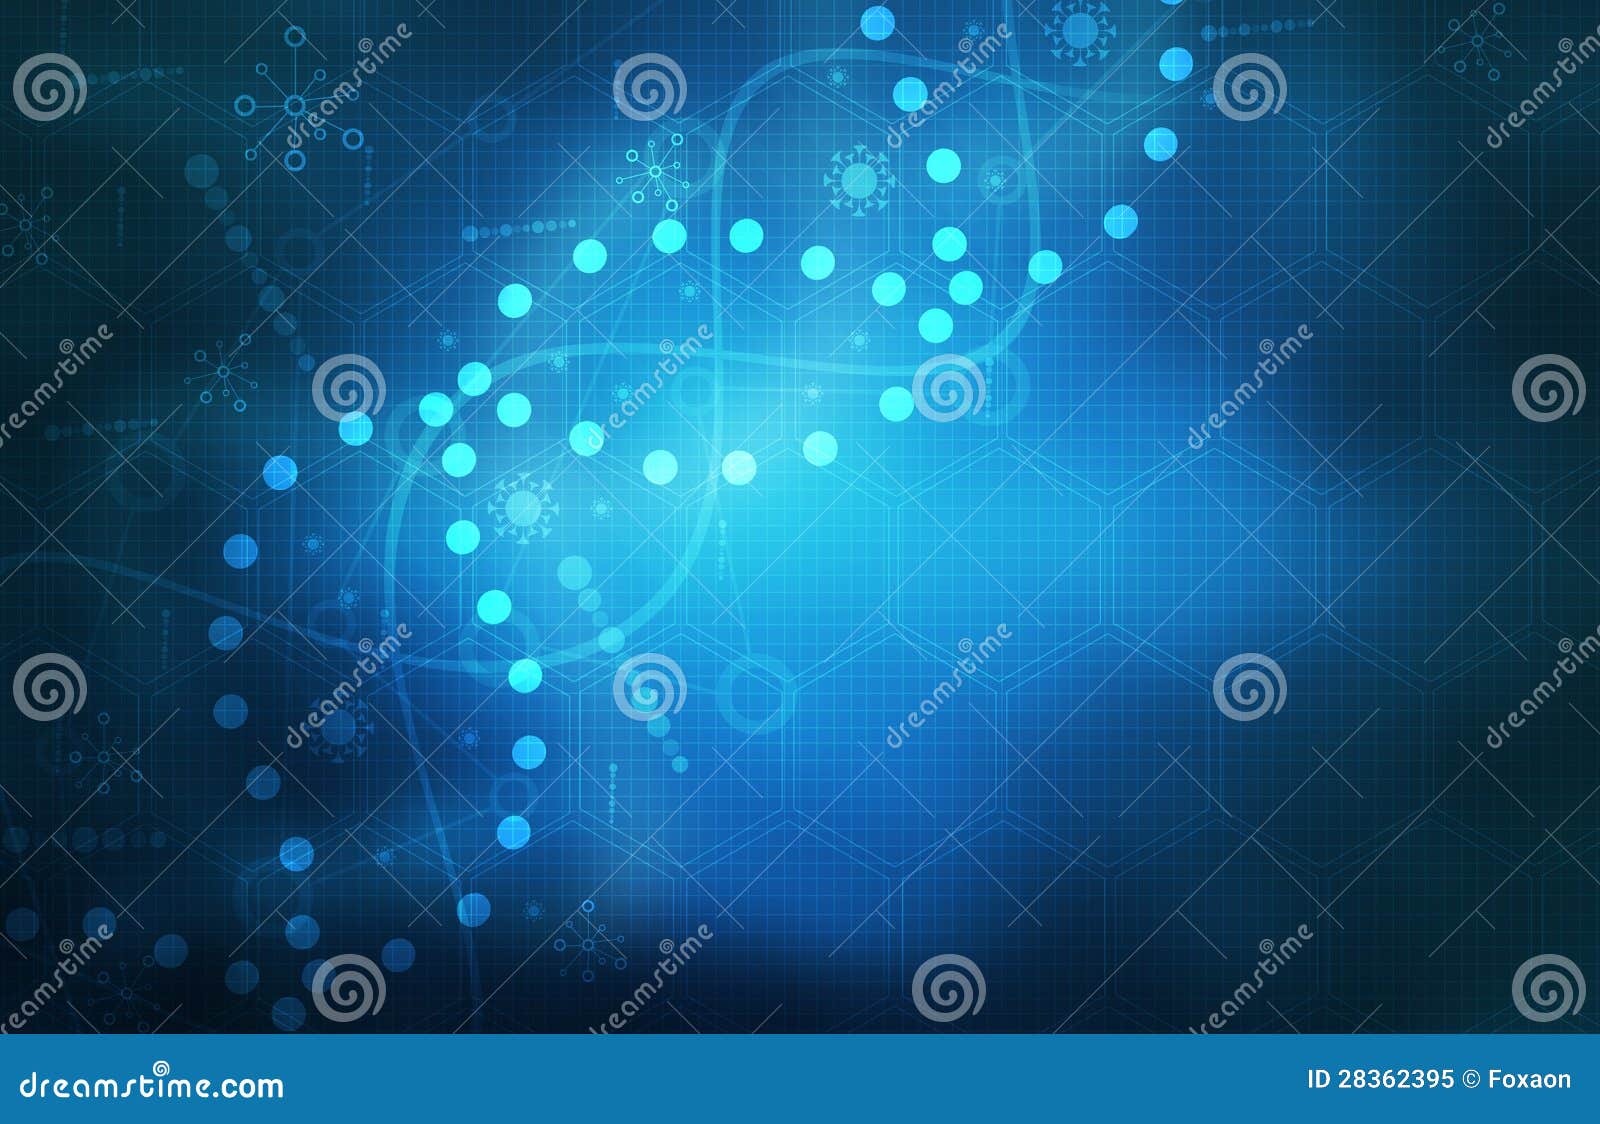 blue medical science futuristic technology abstract background